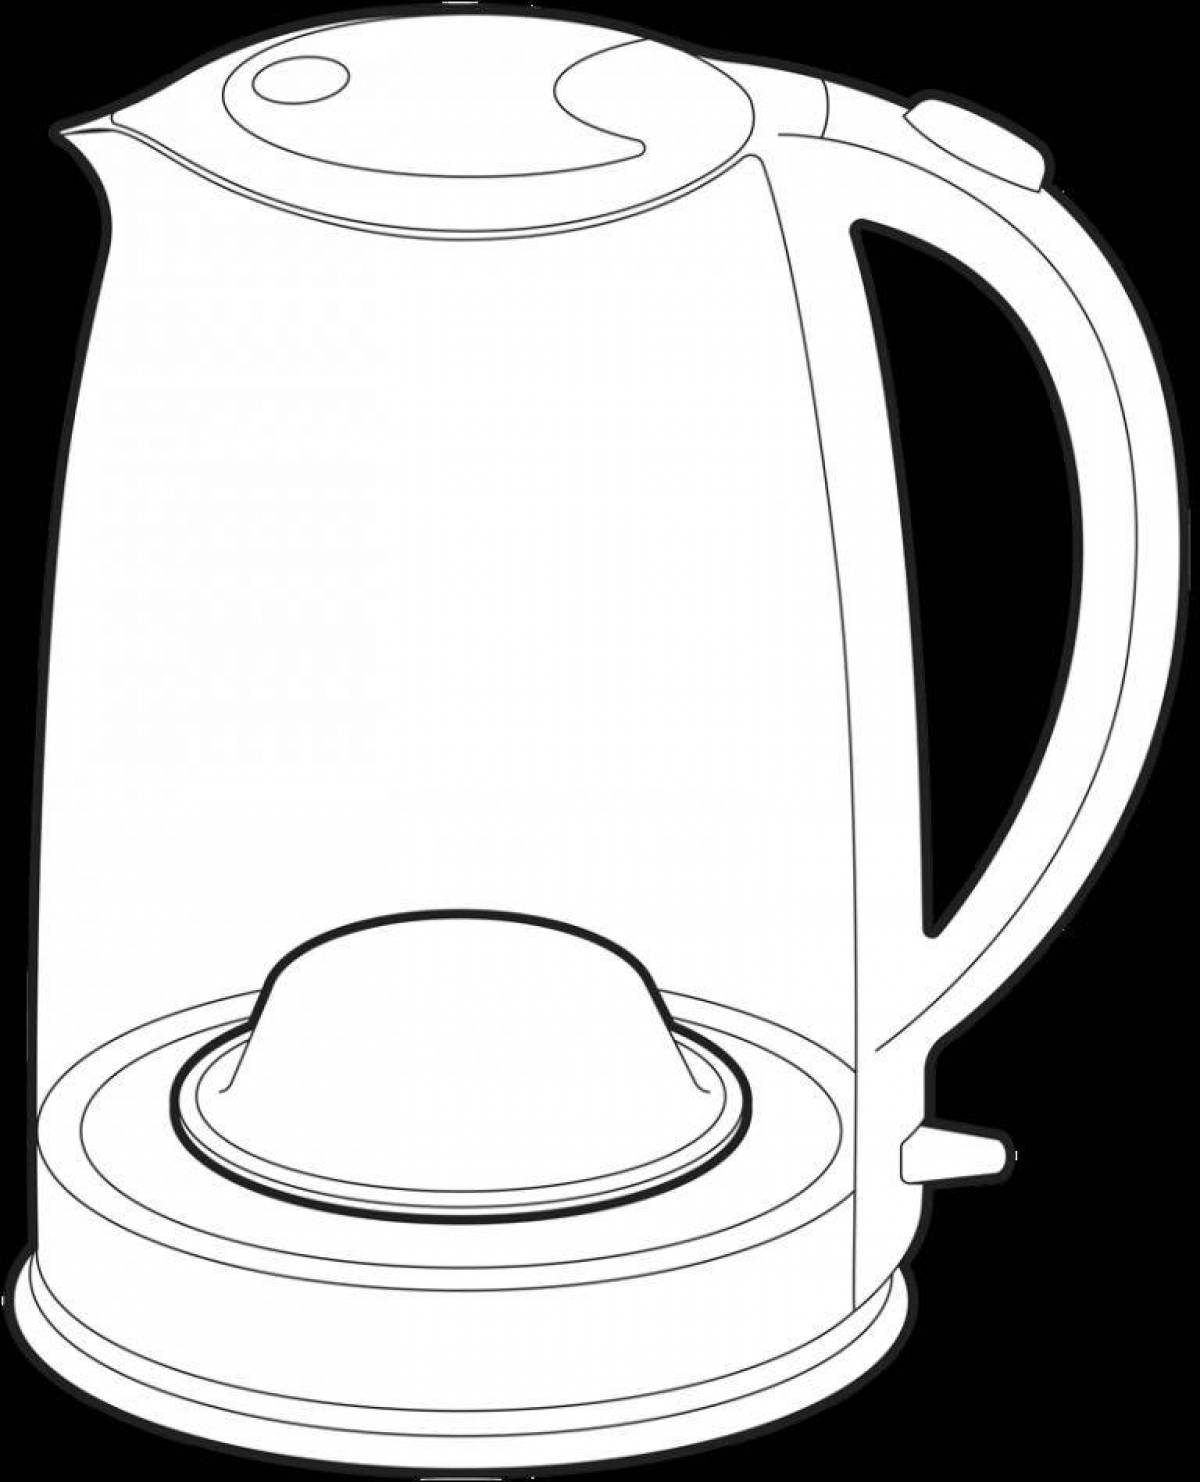 Sparkling electric kettle coloring book